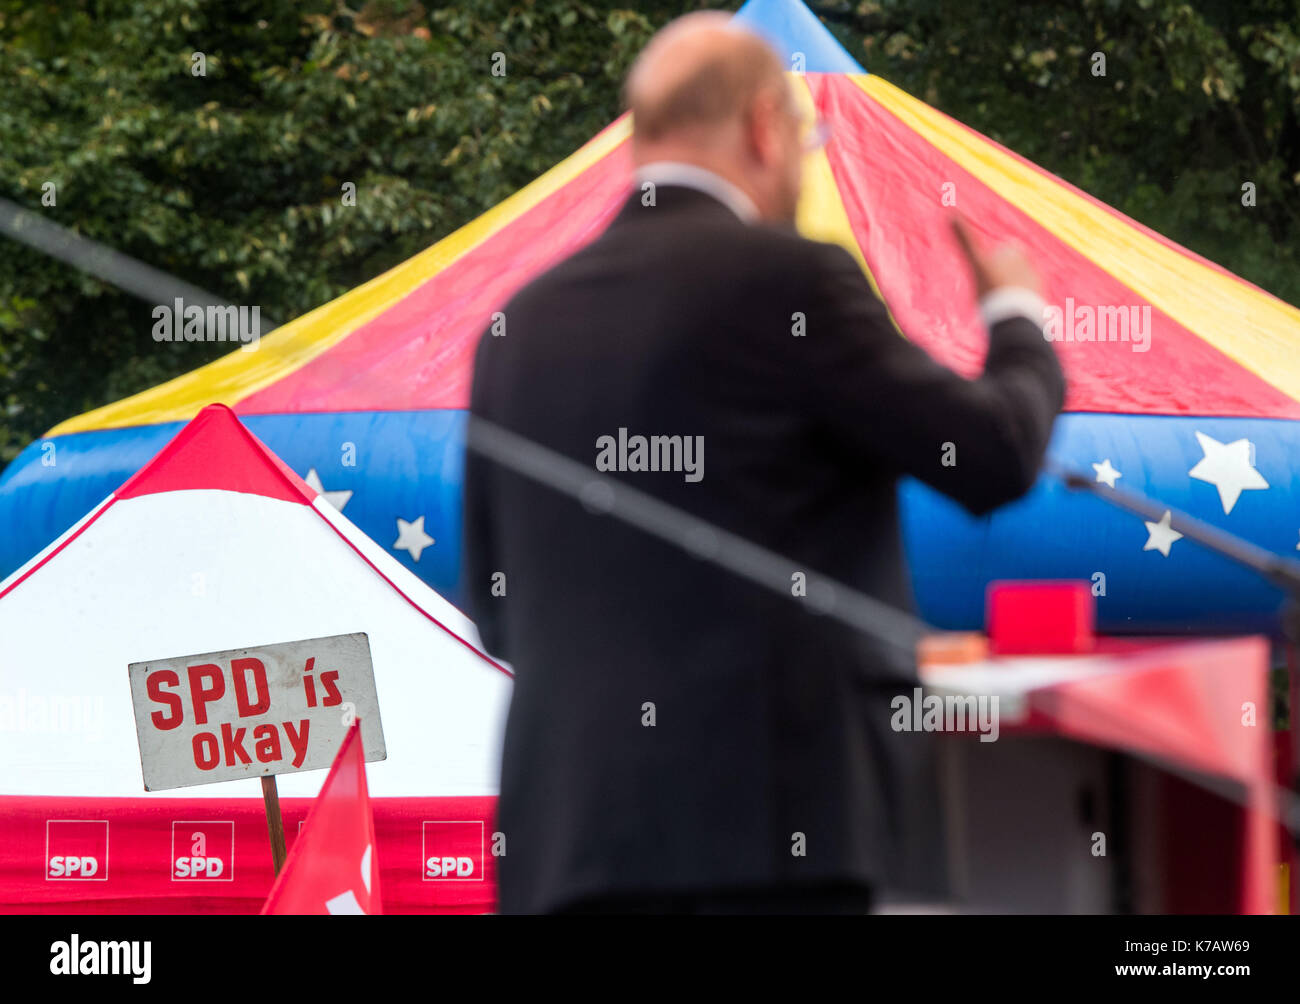 Schwerin, Germany. 15th Sep, 2017. A supporter of the Social Democratic Party of Germany (SPD) holding a homemade sign with the inscription 'SPD is okay' at an election campaign event of Martin Schulz, SPD candidate for chancellorship in Schwerin, Germany, 15 September 2017. Photo: Jens Büttner/dpa-Zentralbild/dpa/Alamy Live News Stock Photo